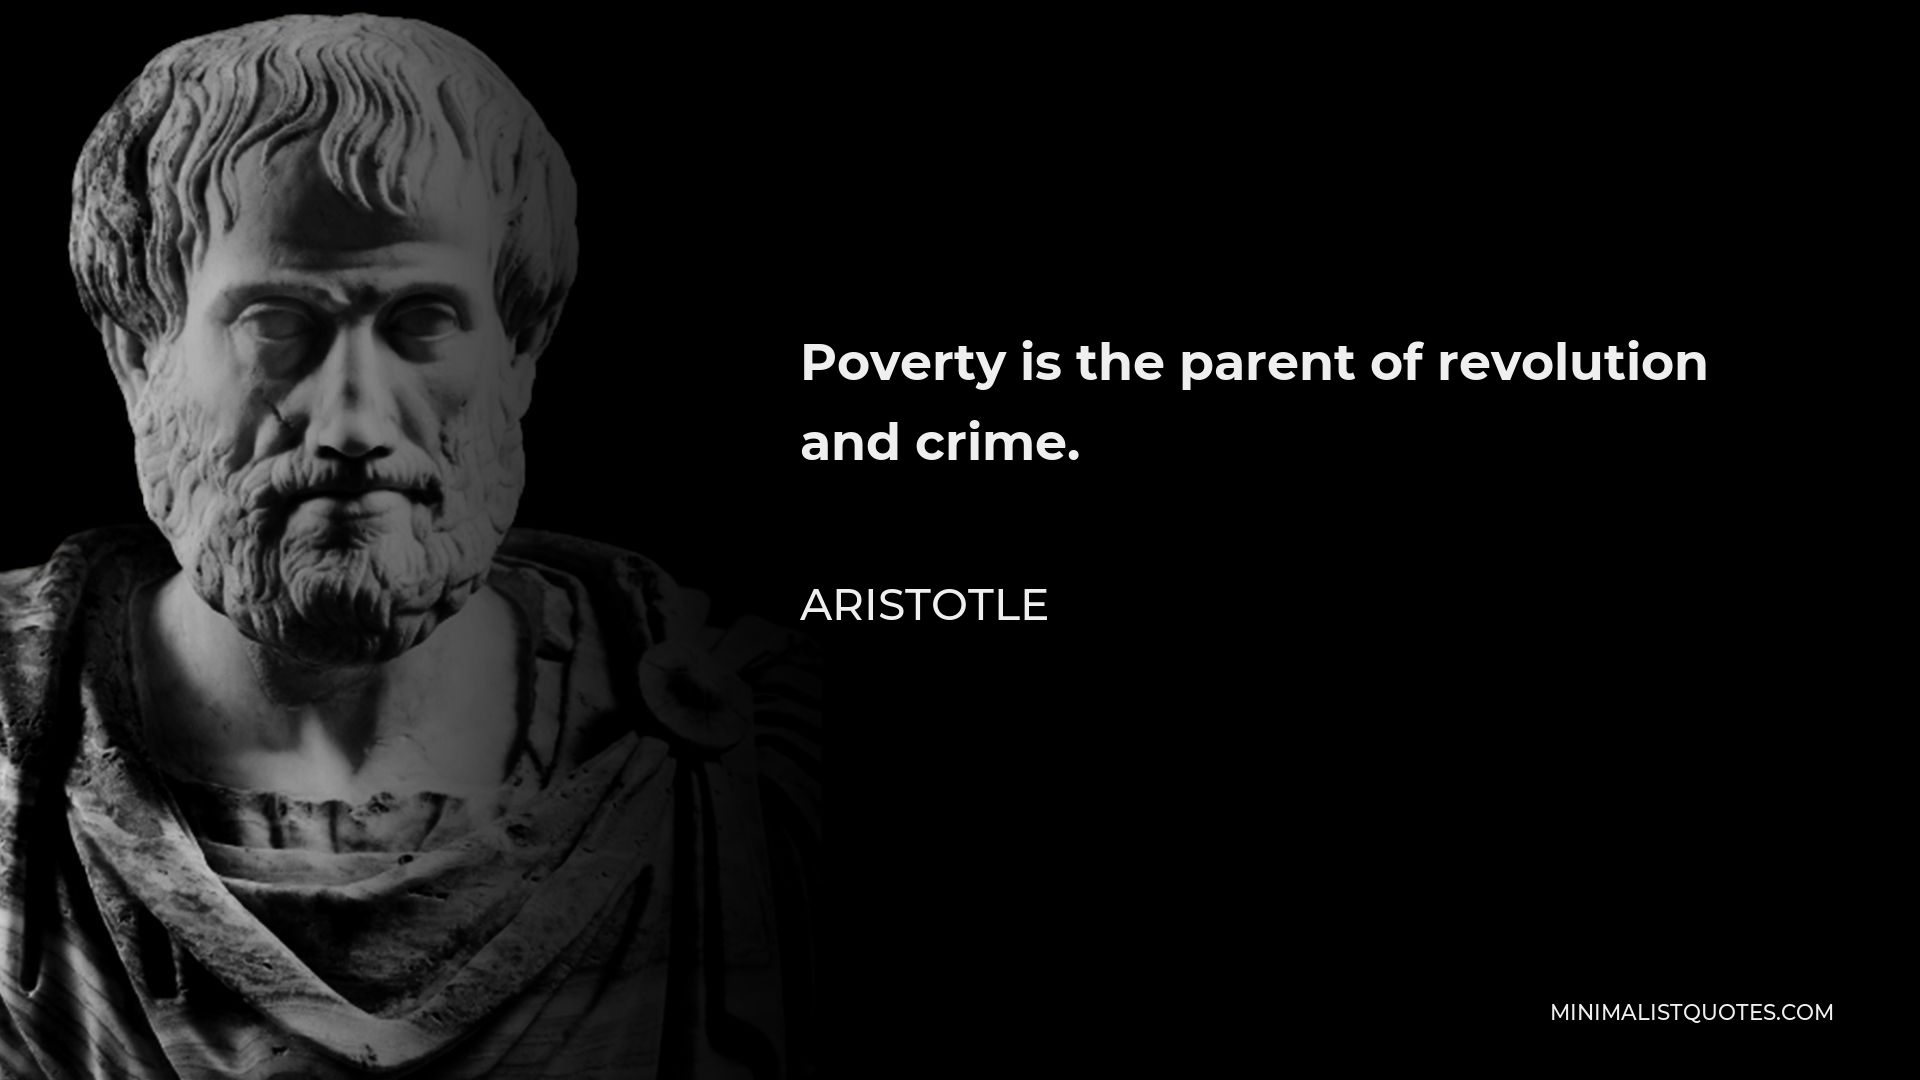 Aristotle Quote - Poverty is the parent of revolution and crime.